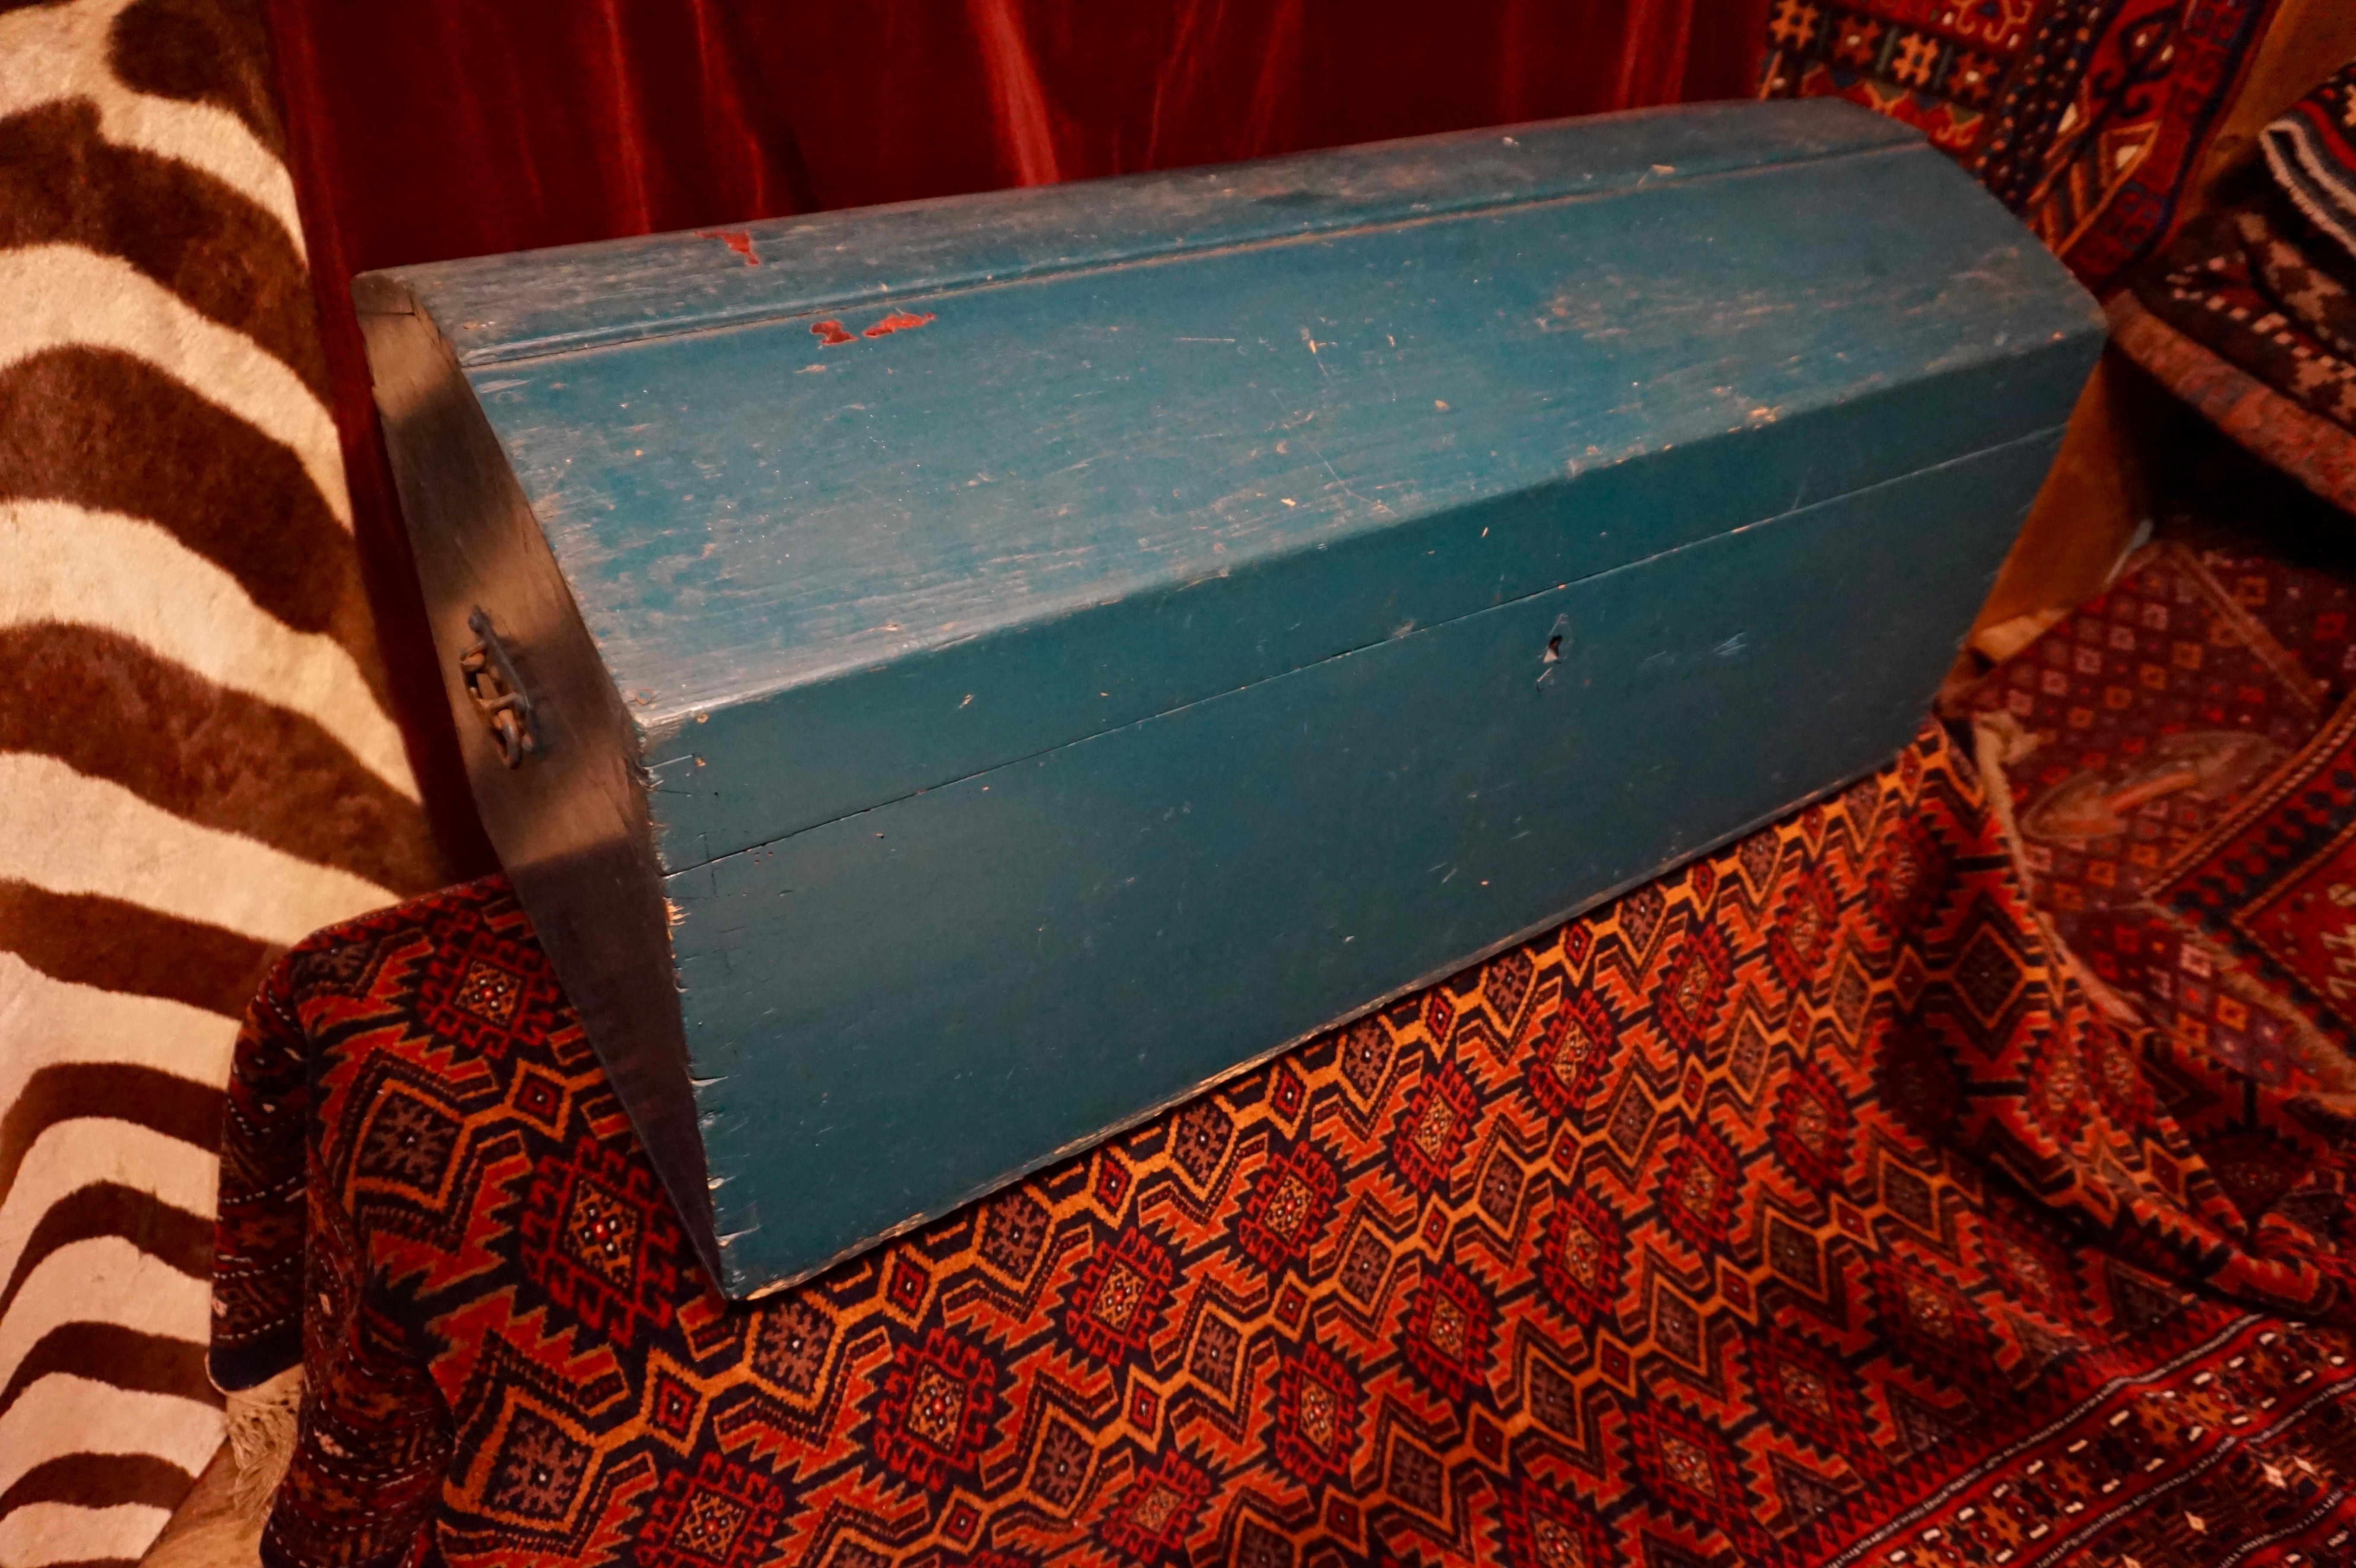 Rare Canadiana East Coast Dome chest with dovetailed joinery and original hardware. Yesteryear turquoise paint has been patinated by time and oozes rustic charm. A beautiful conversation piece to enliven your space and add a dash of flavour.